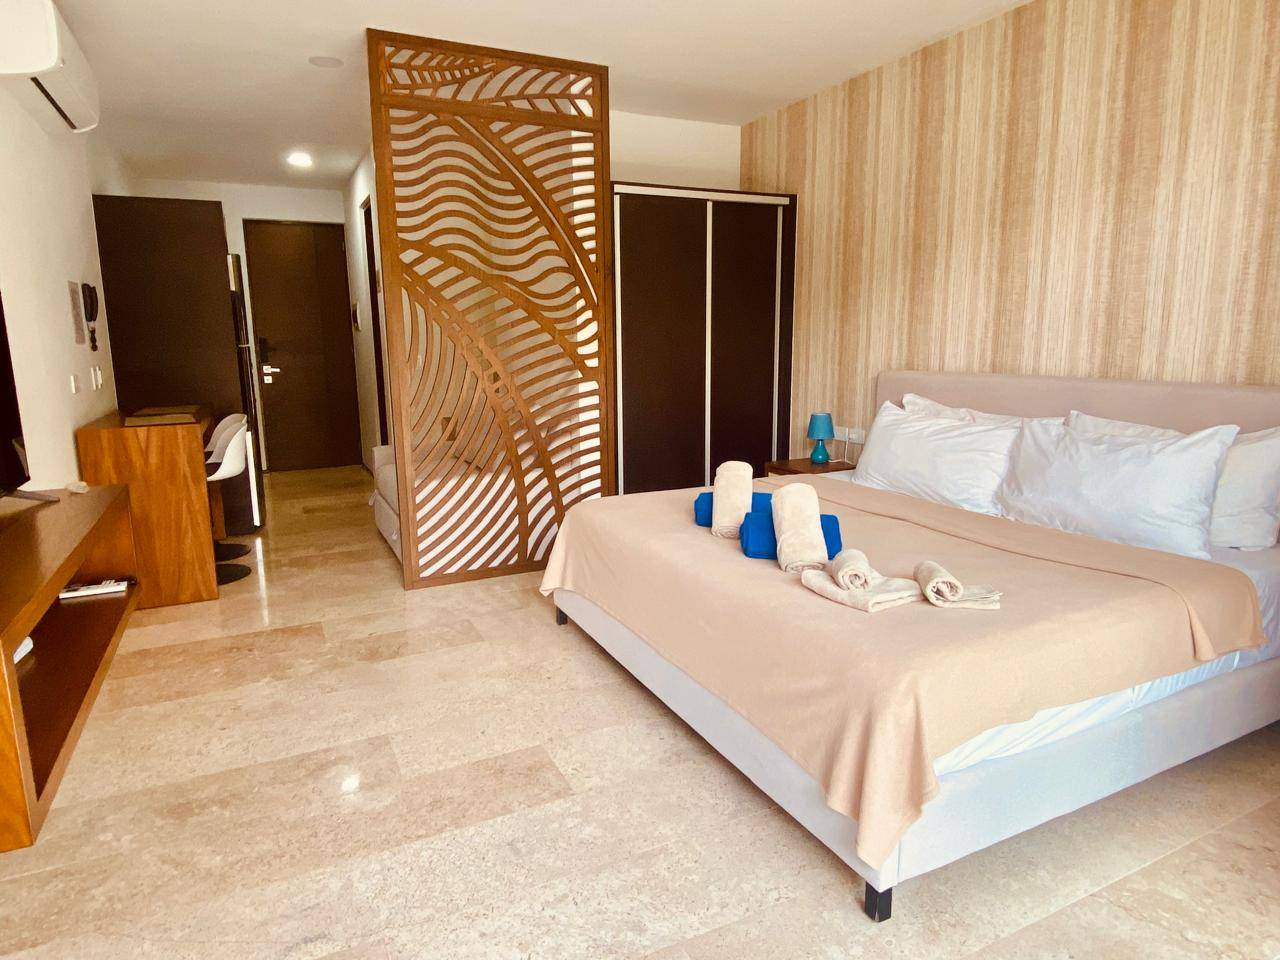 GORGEOUS STUDIO PENTHOUSE WITH PRIVATE POOL AND PREMIUM AMENITIES IN TULUM´S HEART